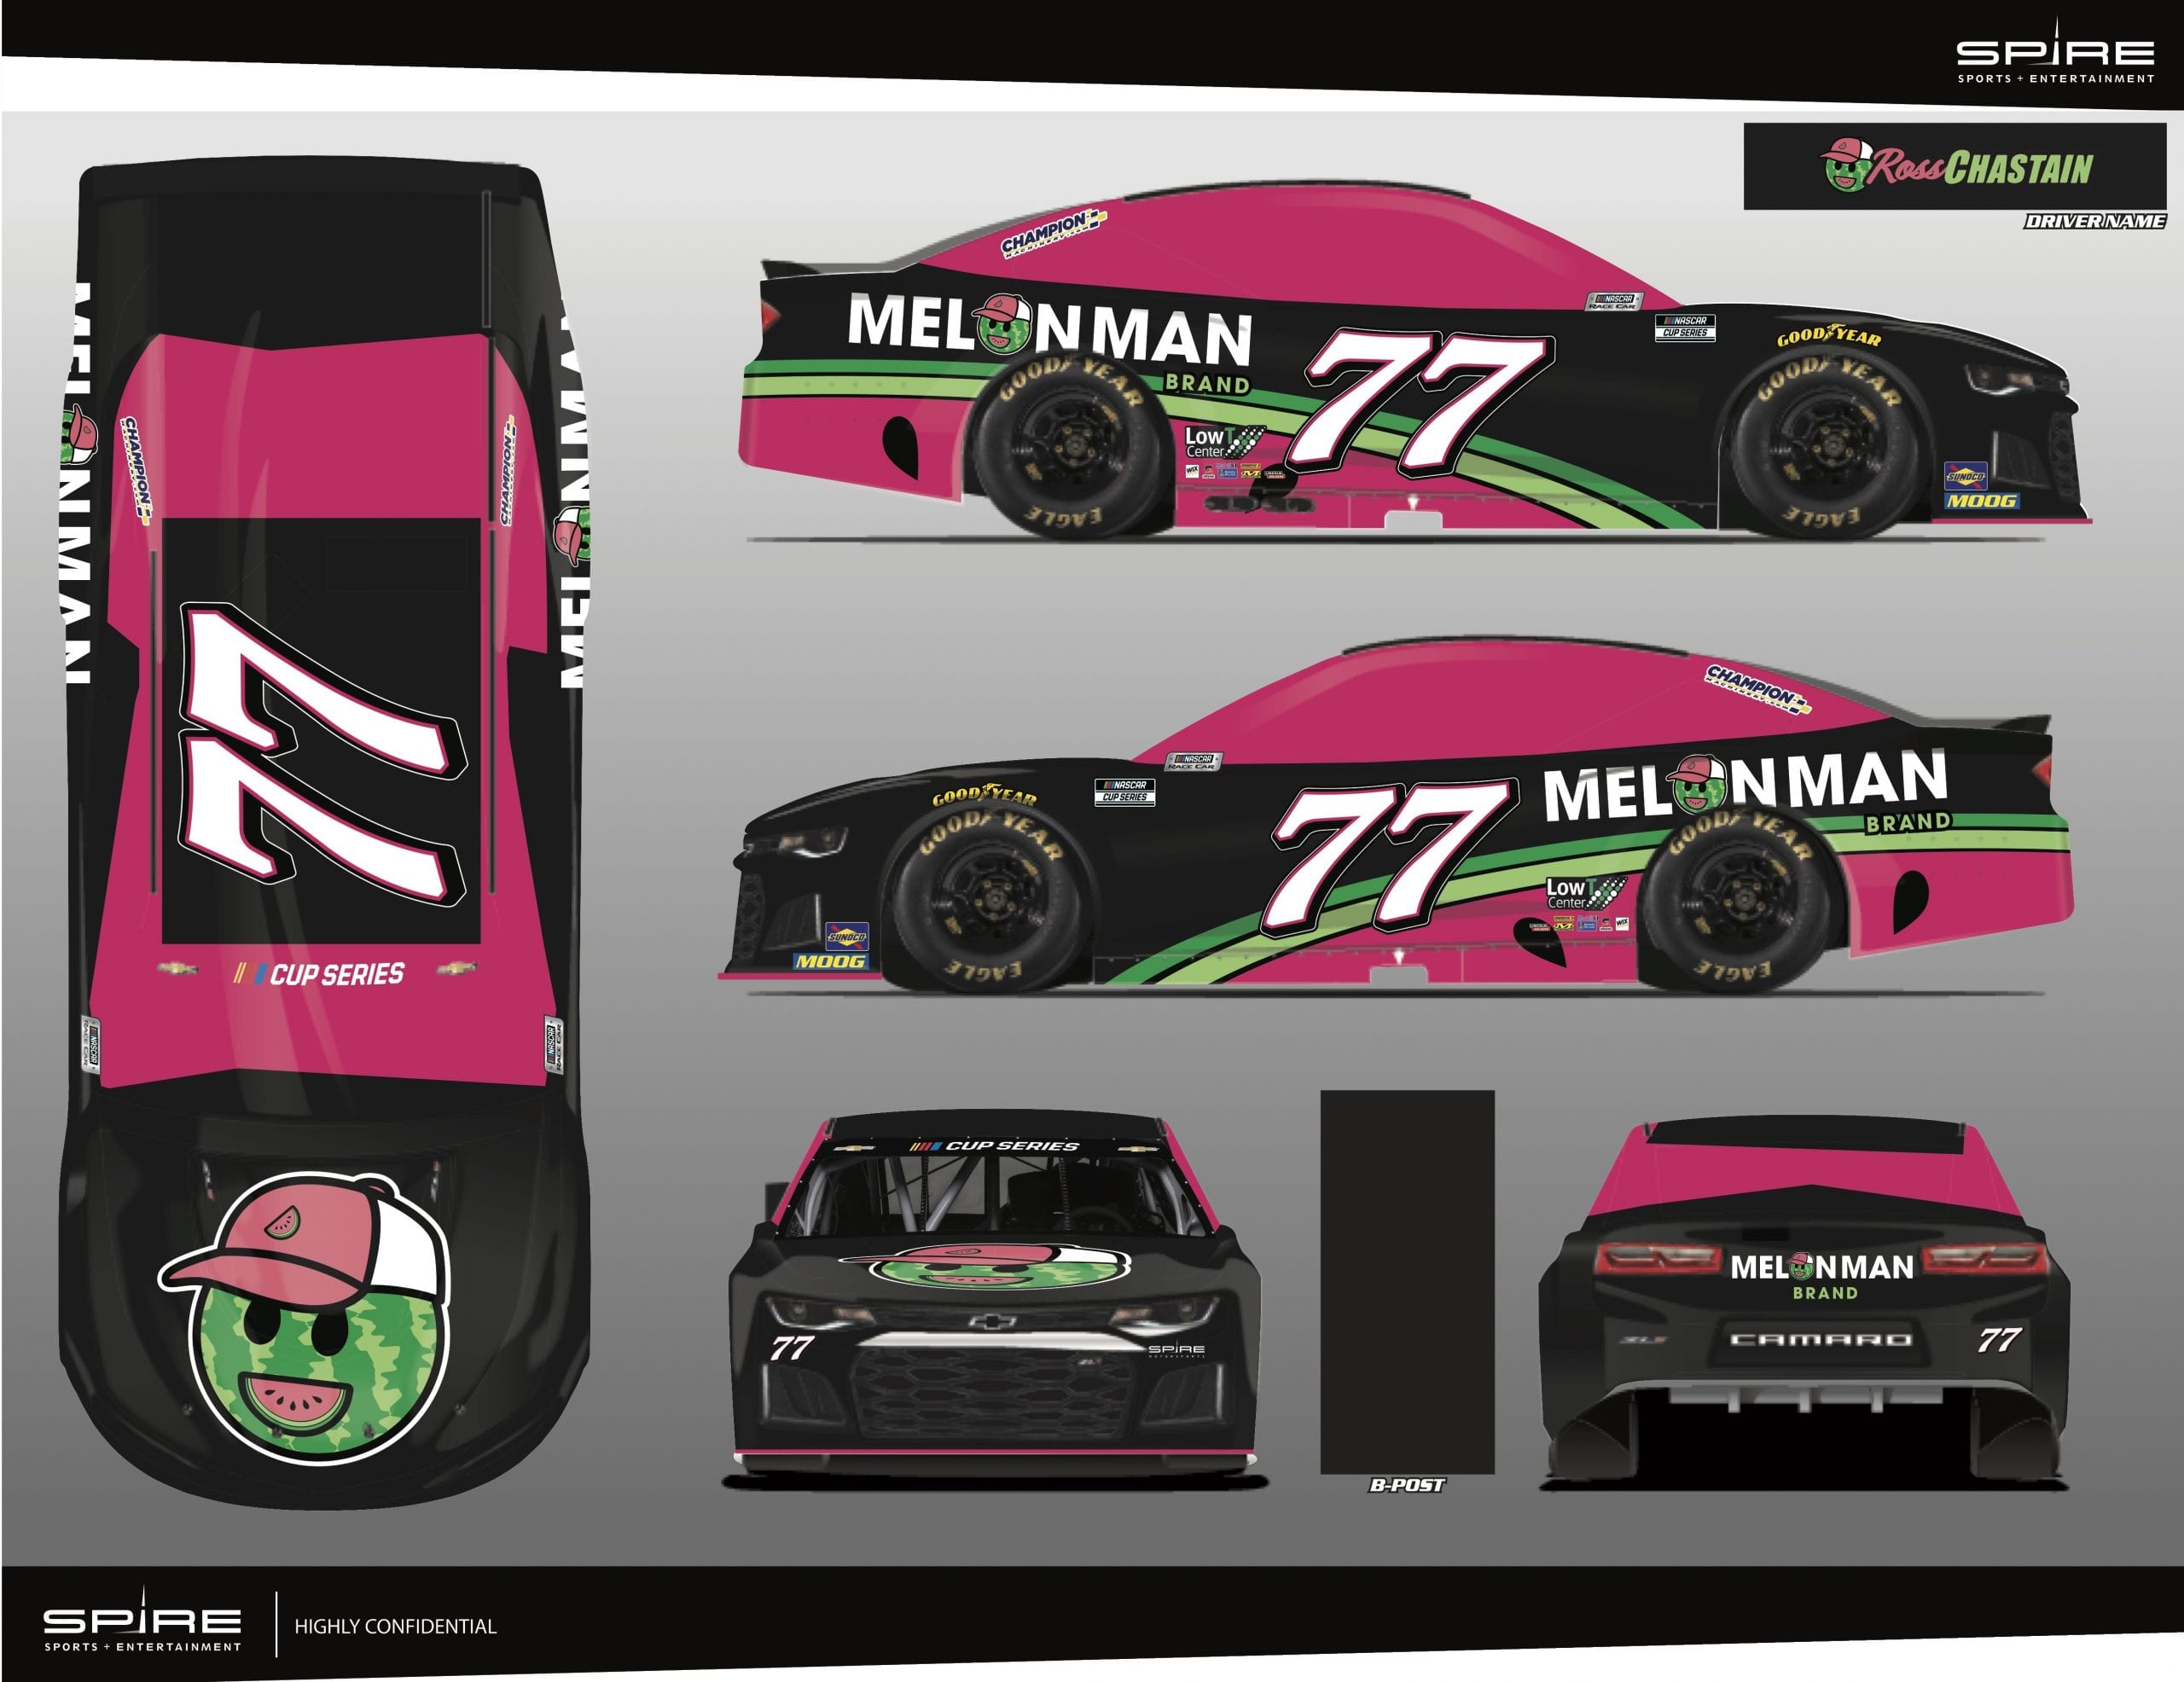 Ross Chastain will drive the No. 77 for Spire Motorsports at Indianapolis Motor Speedway.